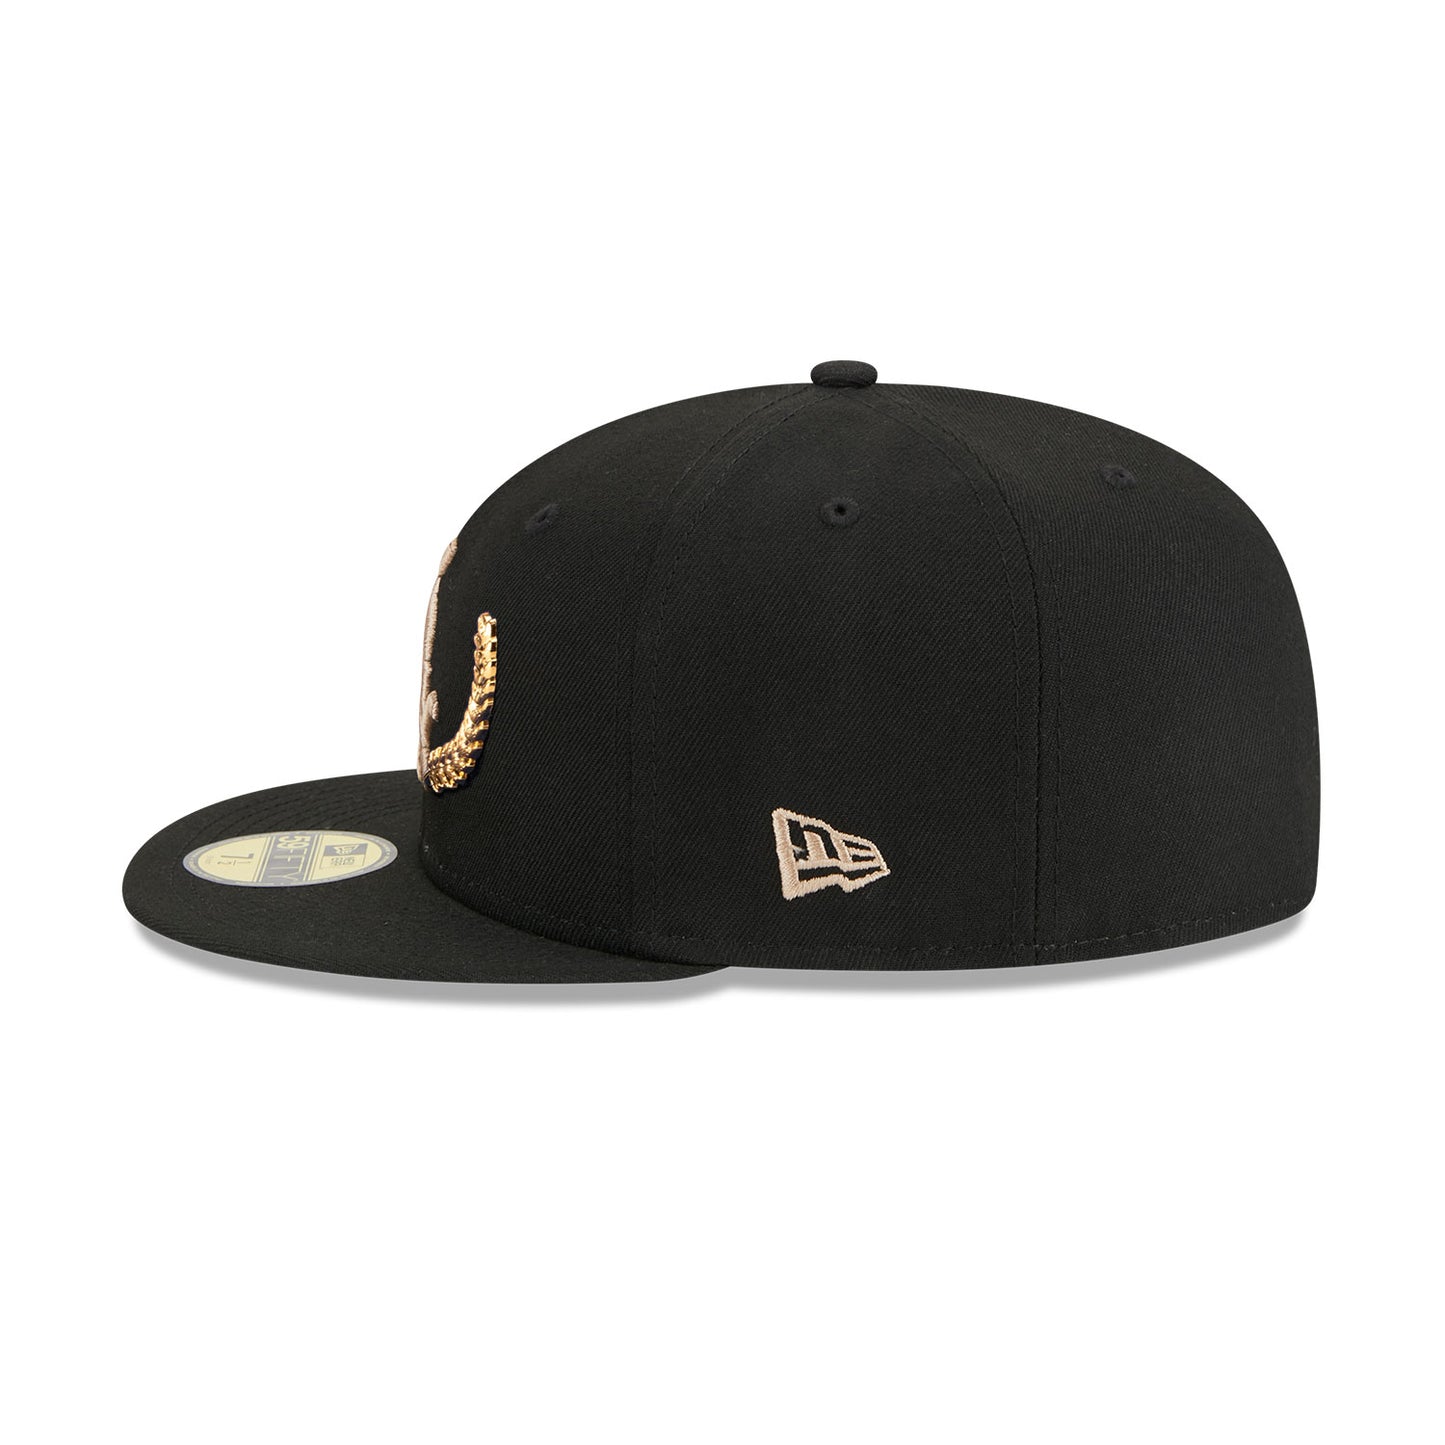 Chicago White Sox Gold Leaf Black 59FIFTY Fitted Cap